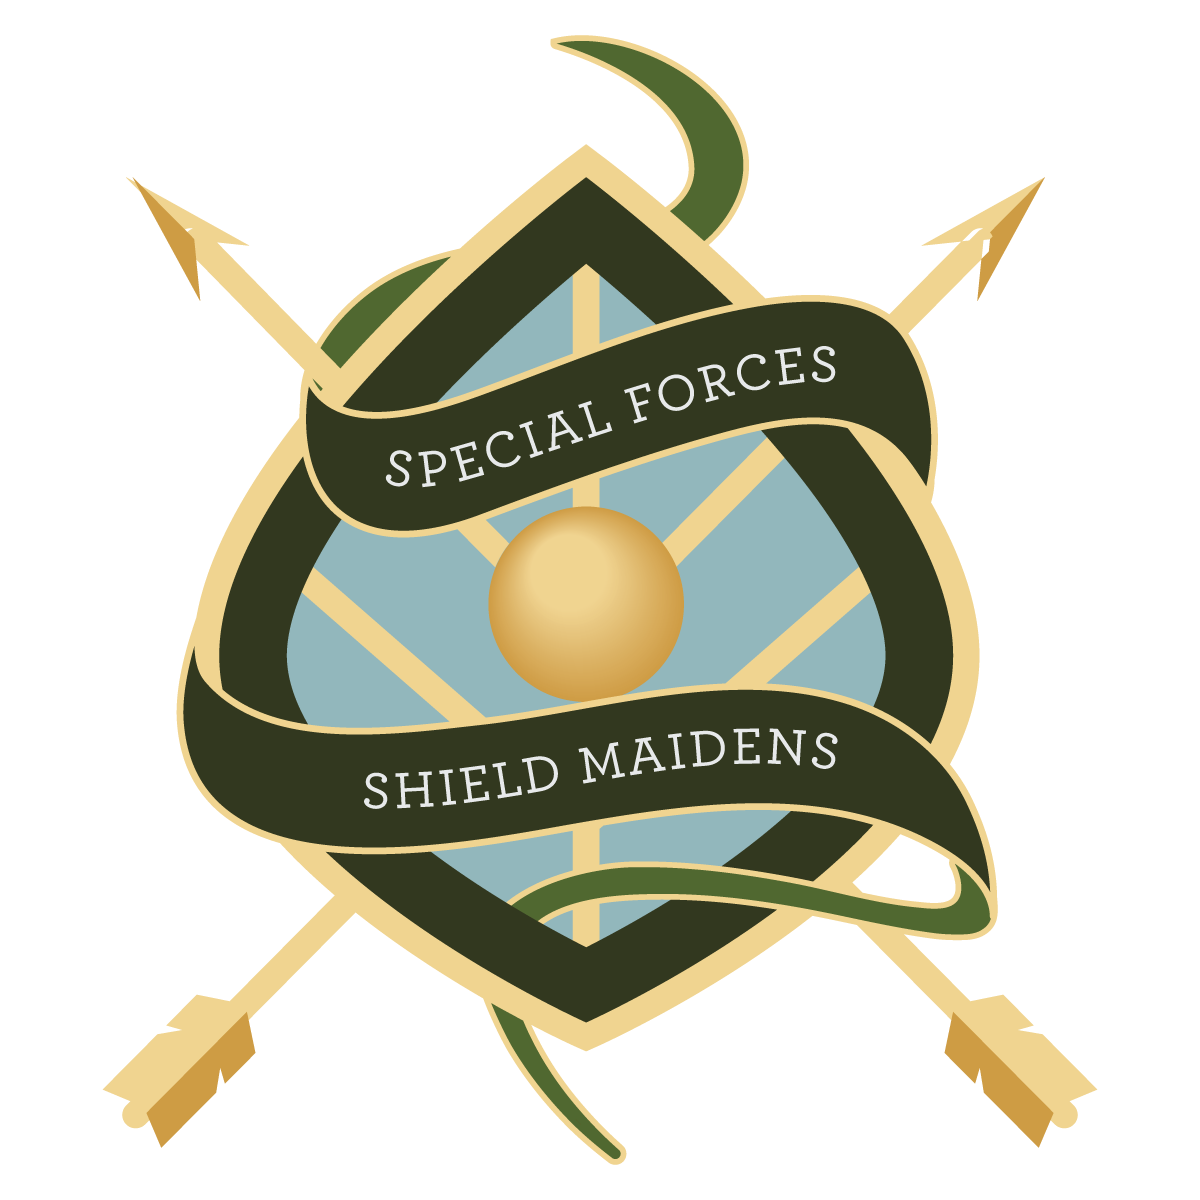 Special Forces Shield Maidens